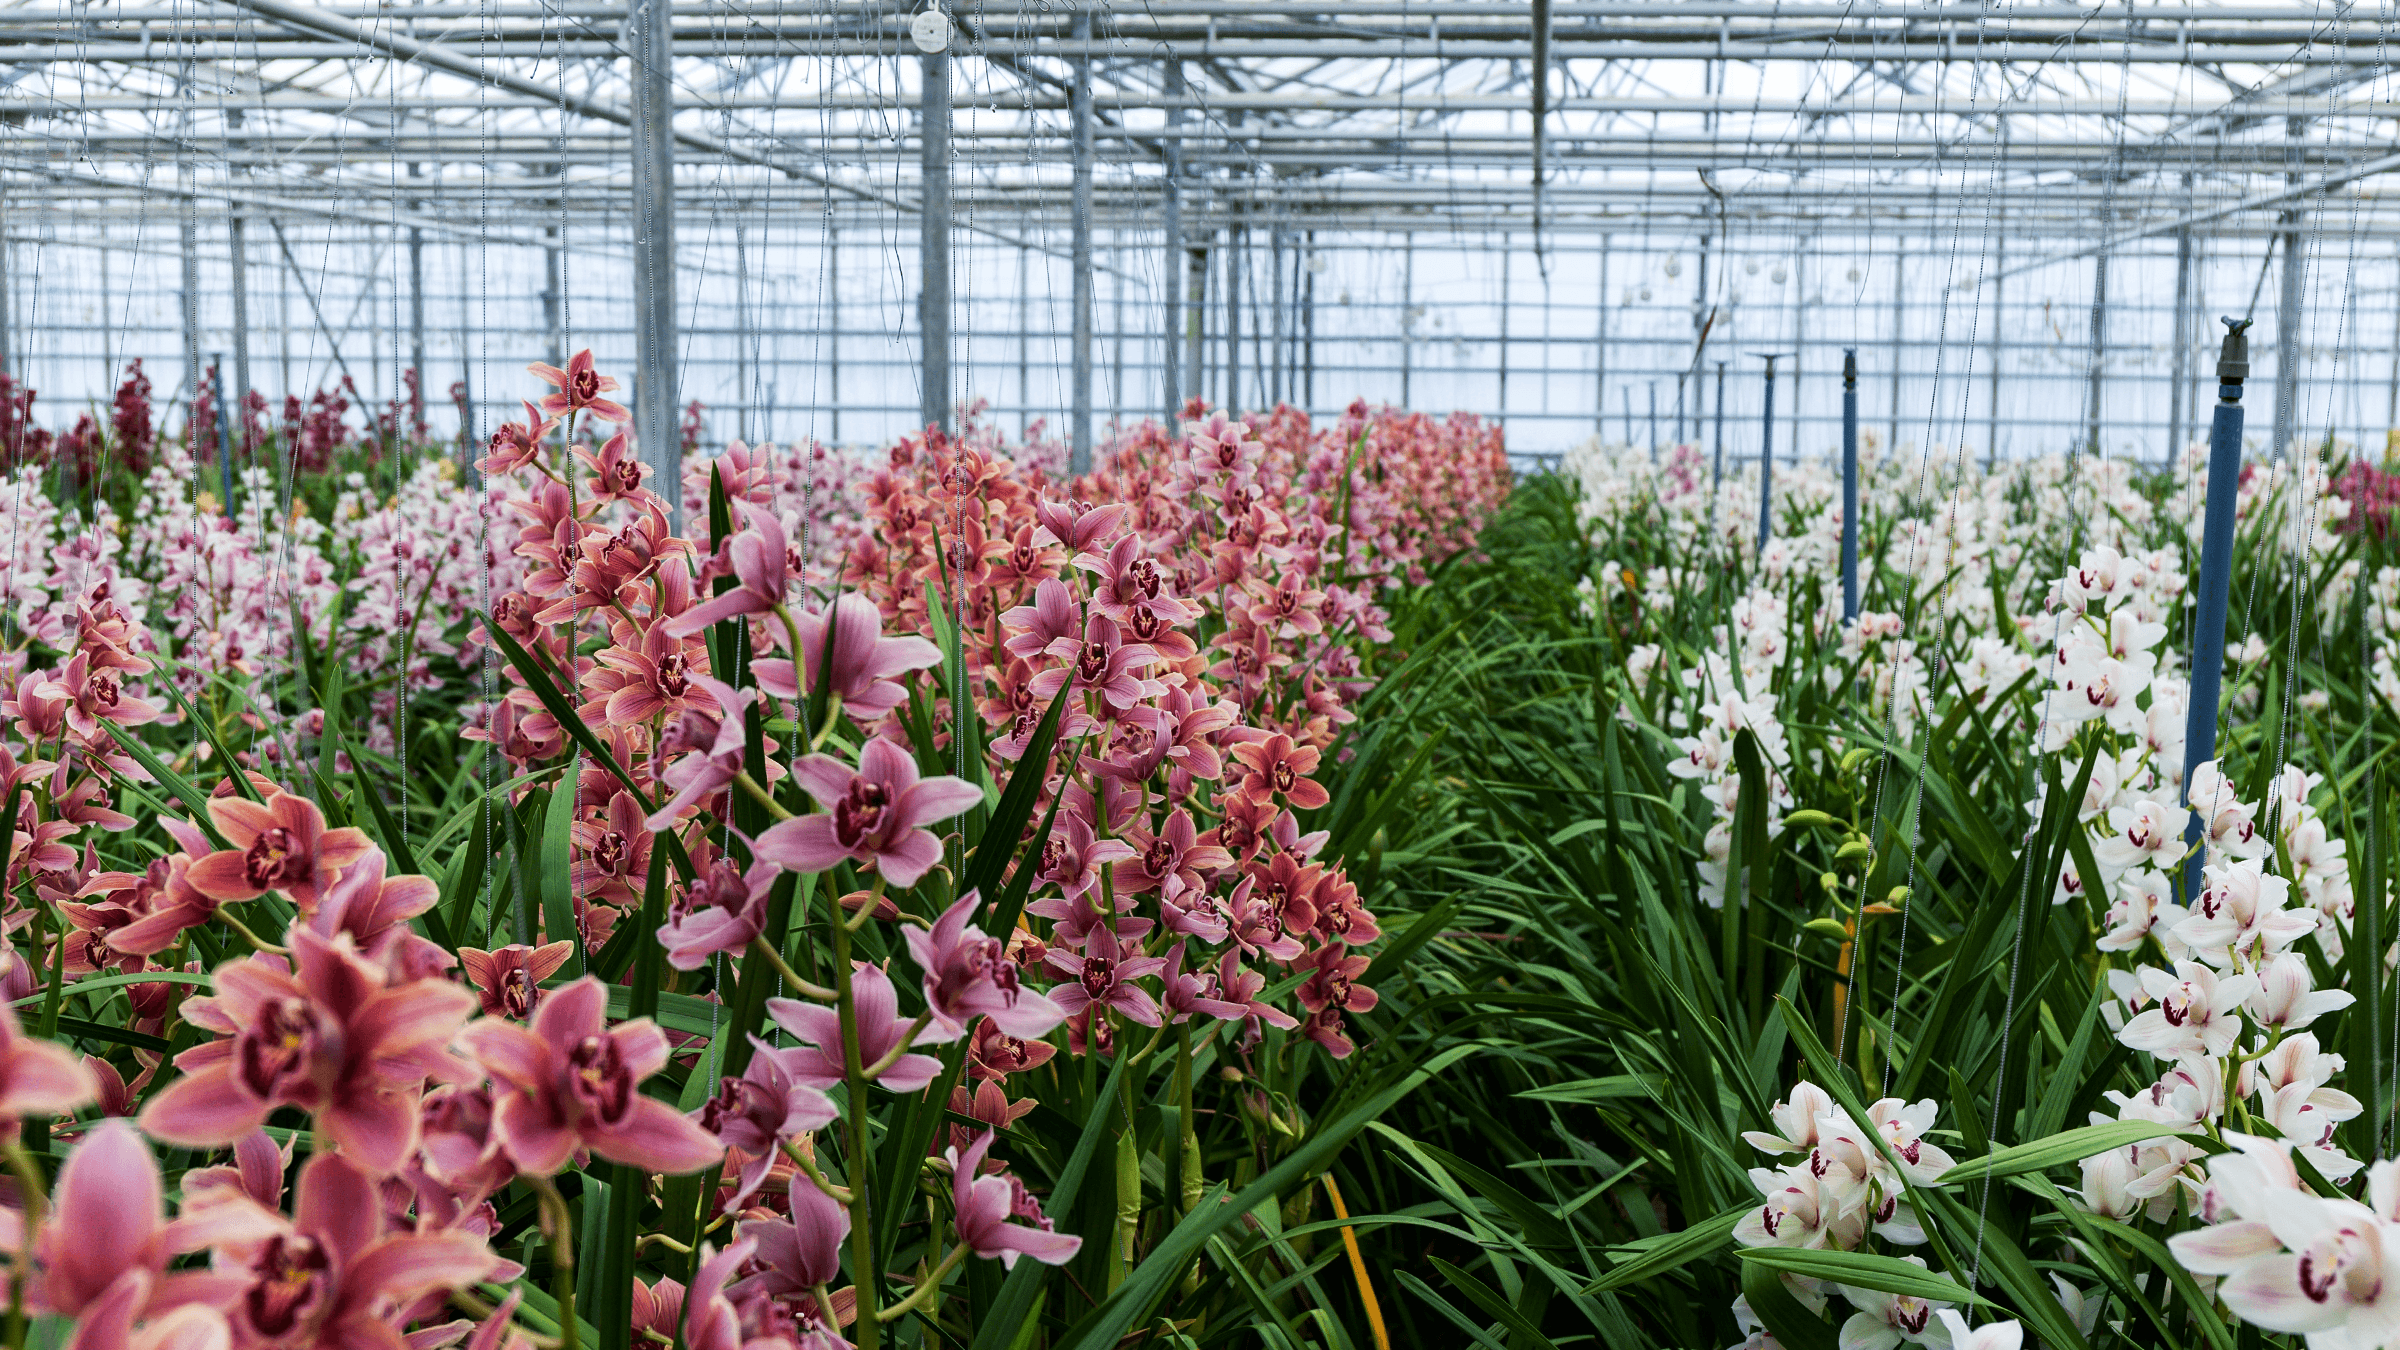 An orchid farm with pink and white orchids